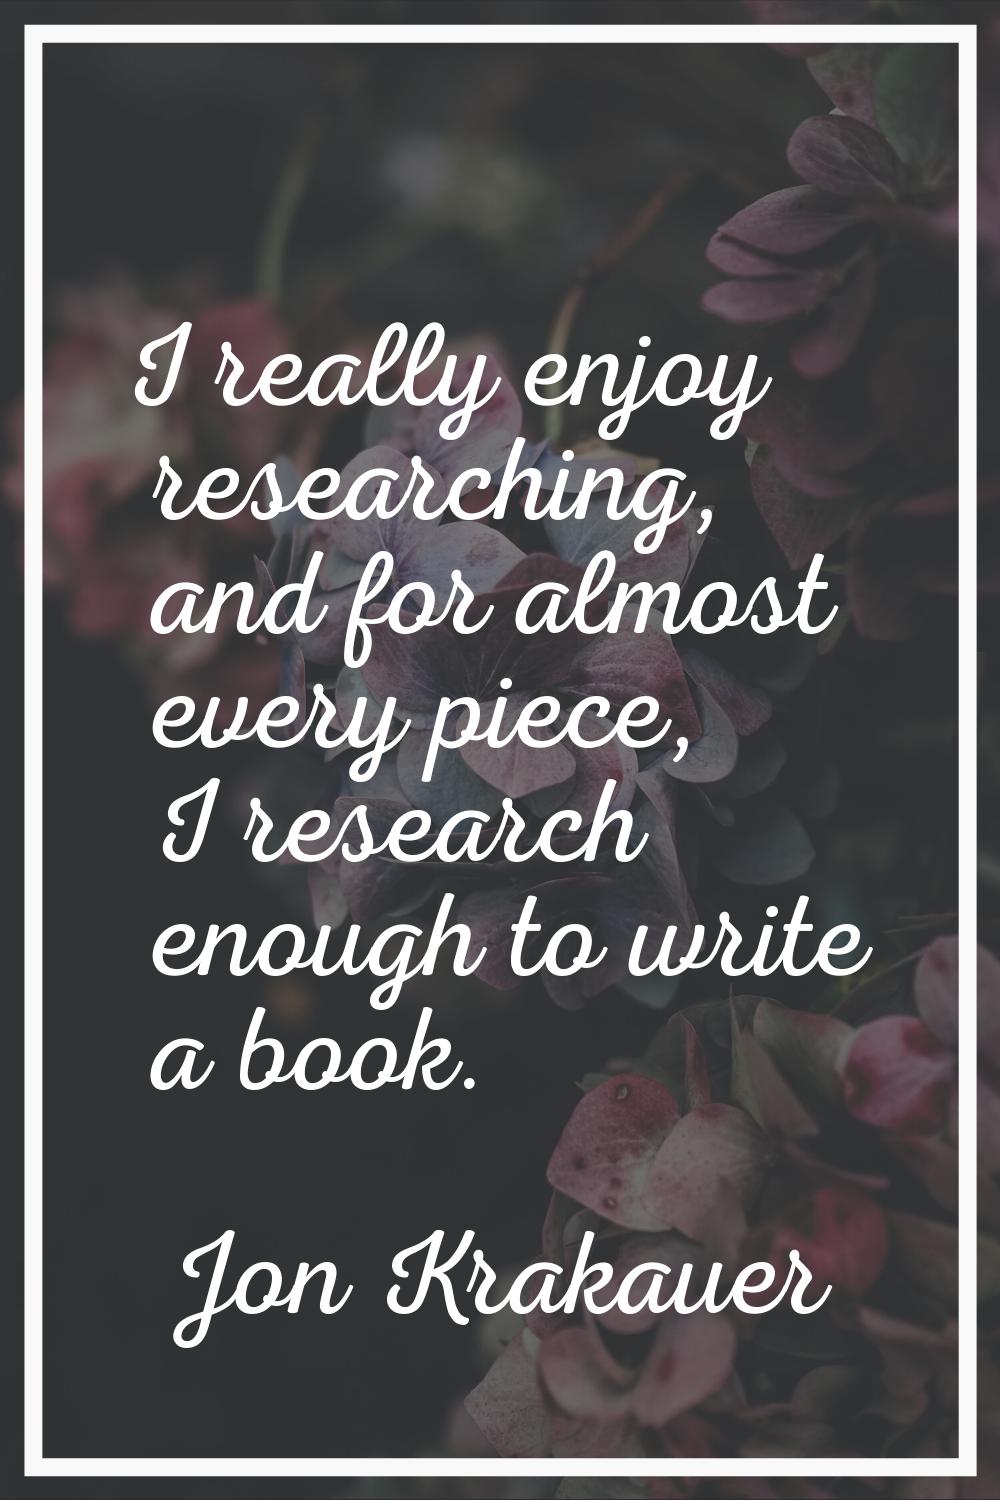 I really enjoy researching, and for almost every piece, I research enough to write a book.